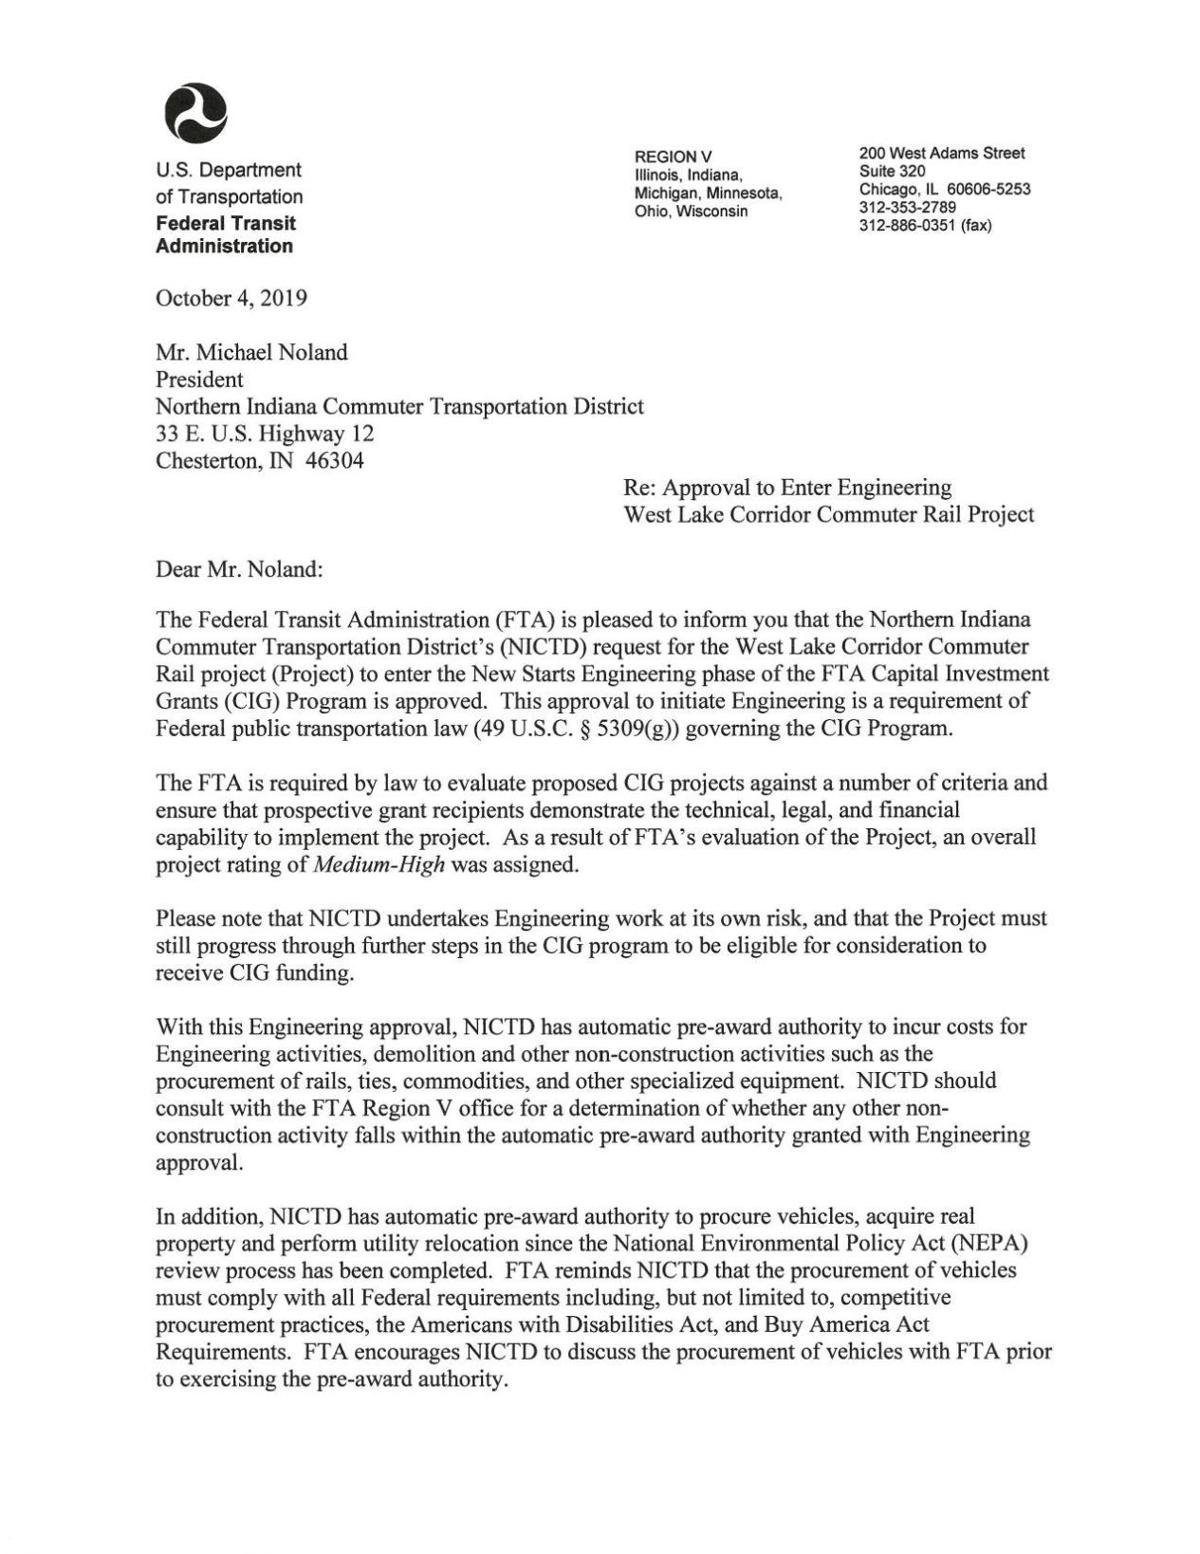 FTA letter approving West Lake engineering